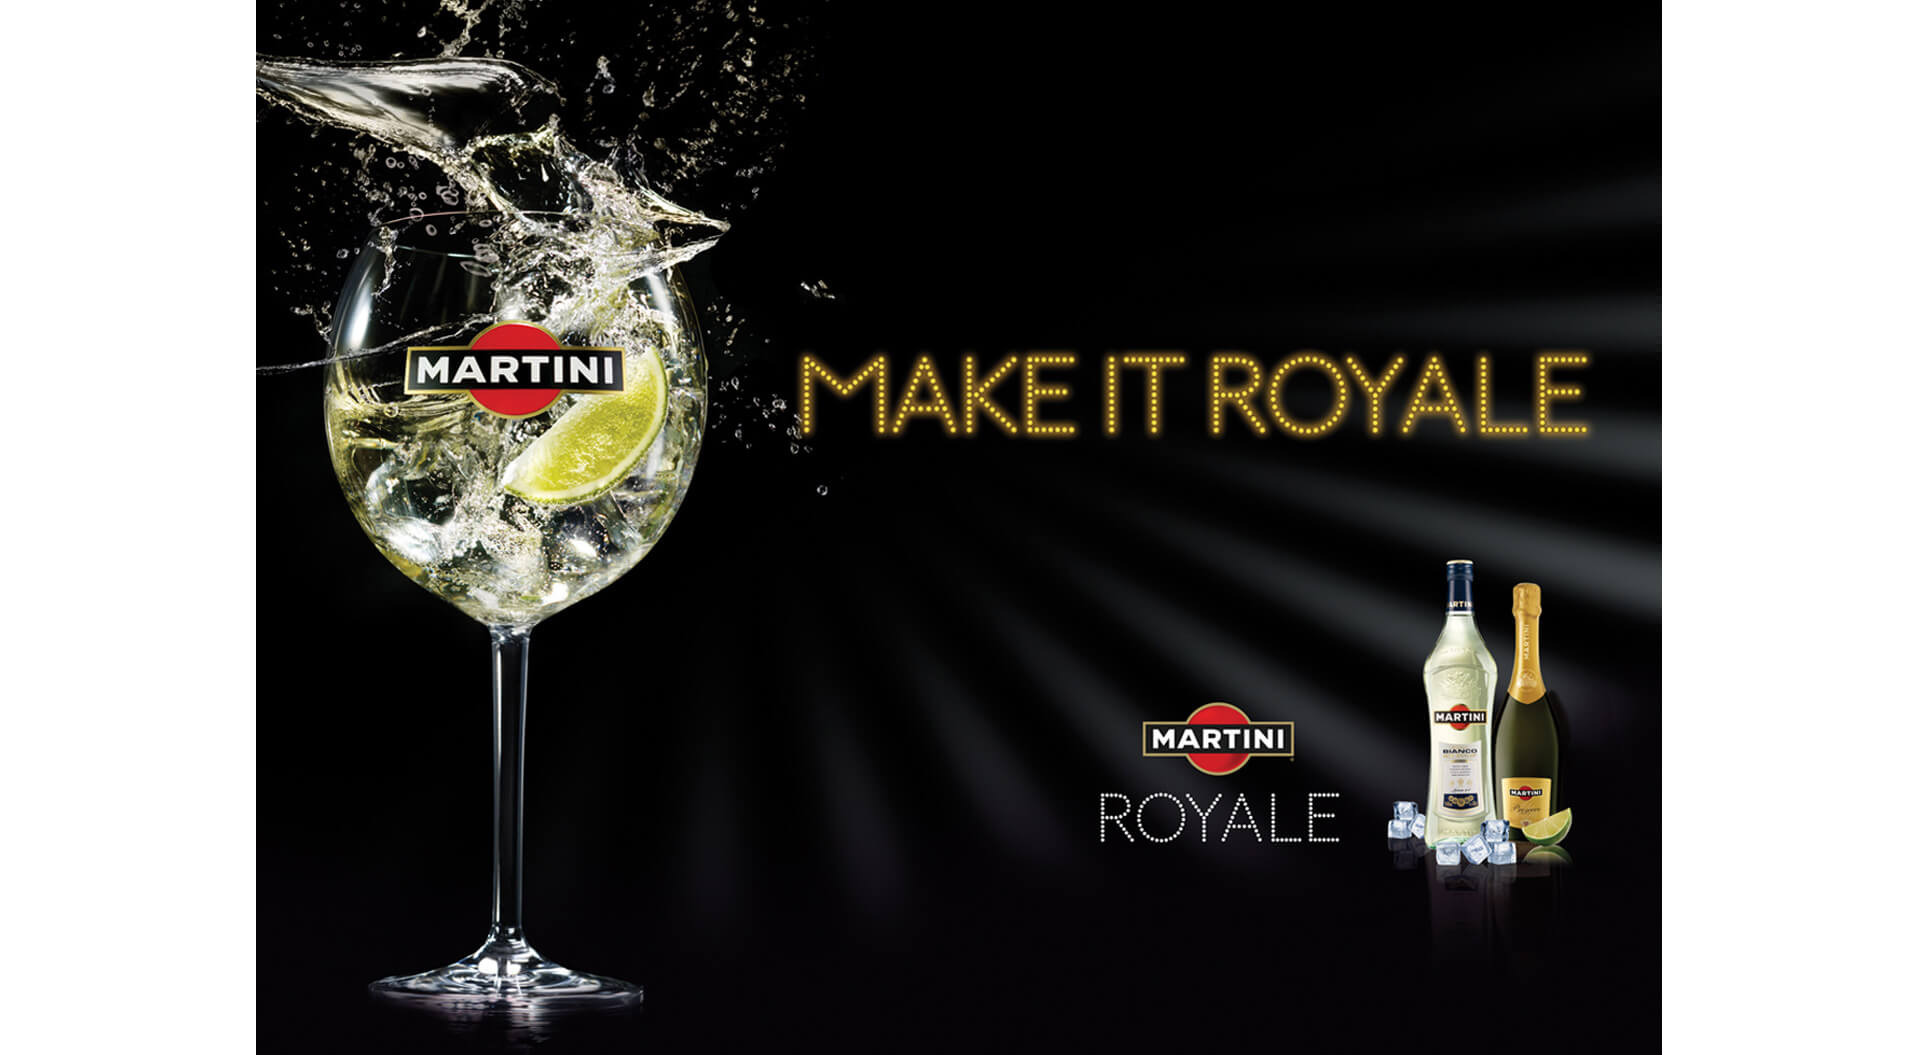  Martini Royale spirits industry promotion campaigns branding in airports, duty-free alcohol marketing for Bacardi Global Travel Retail